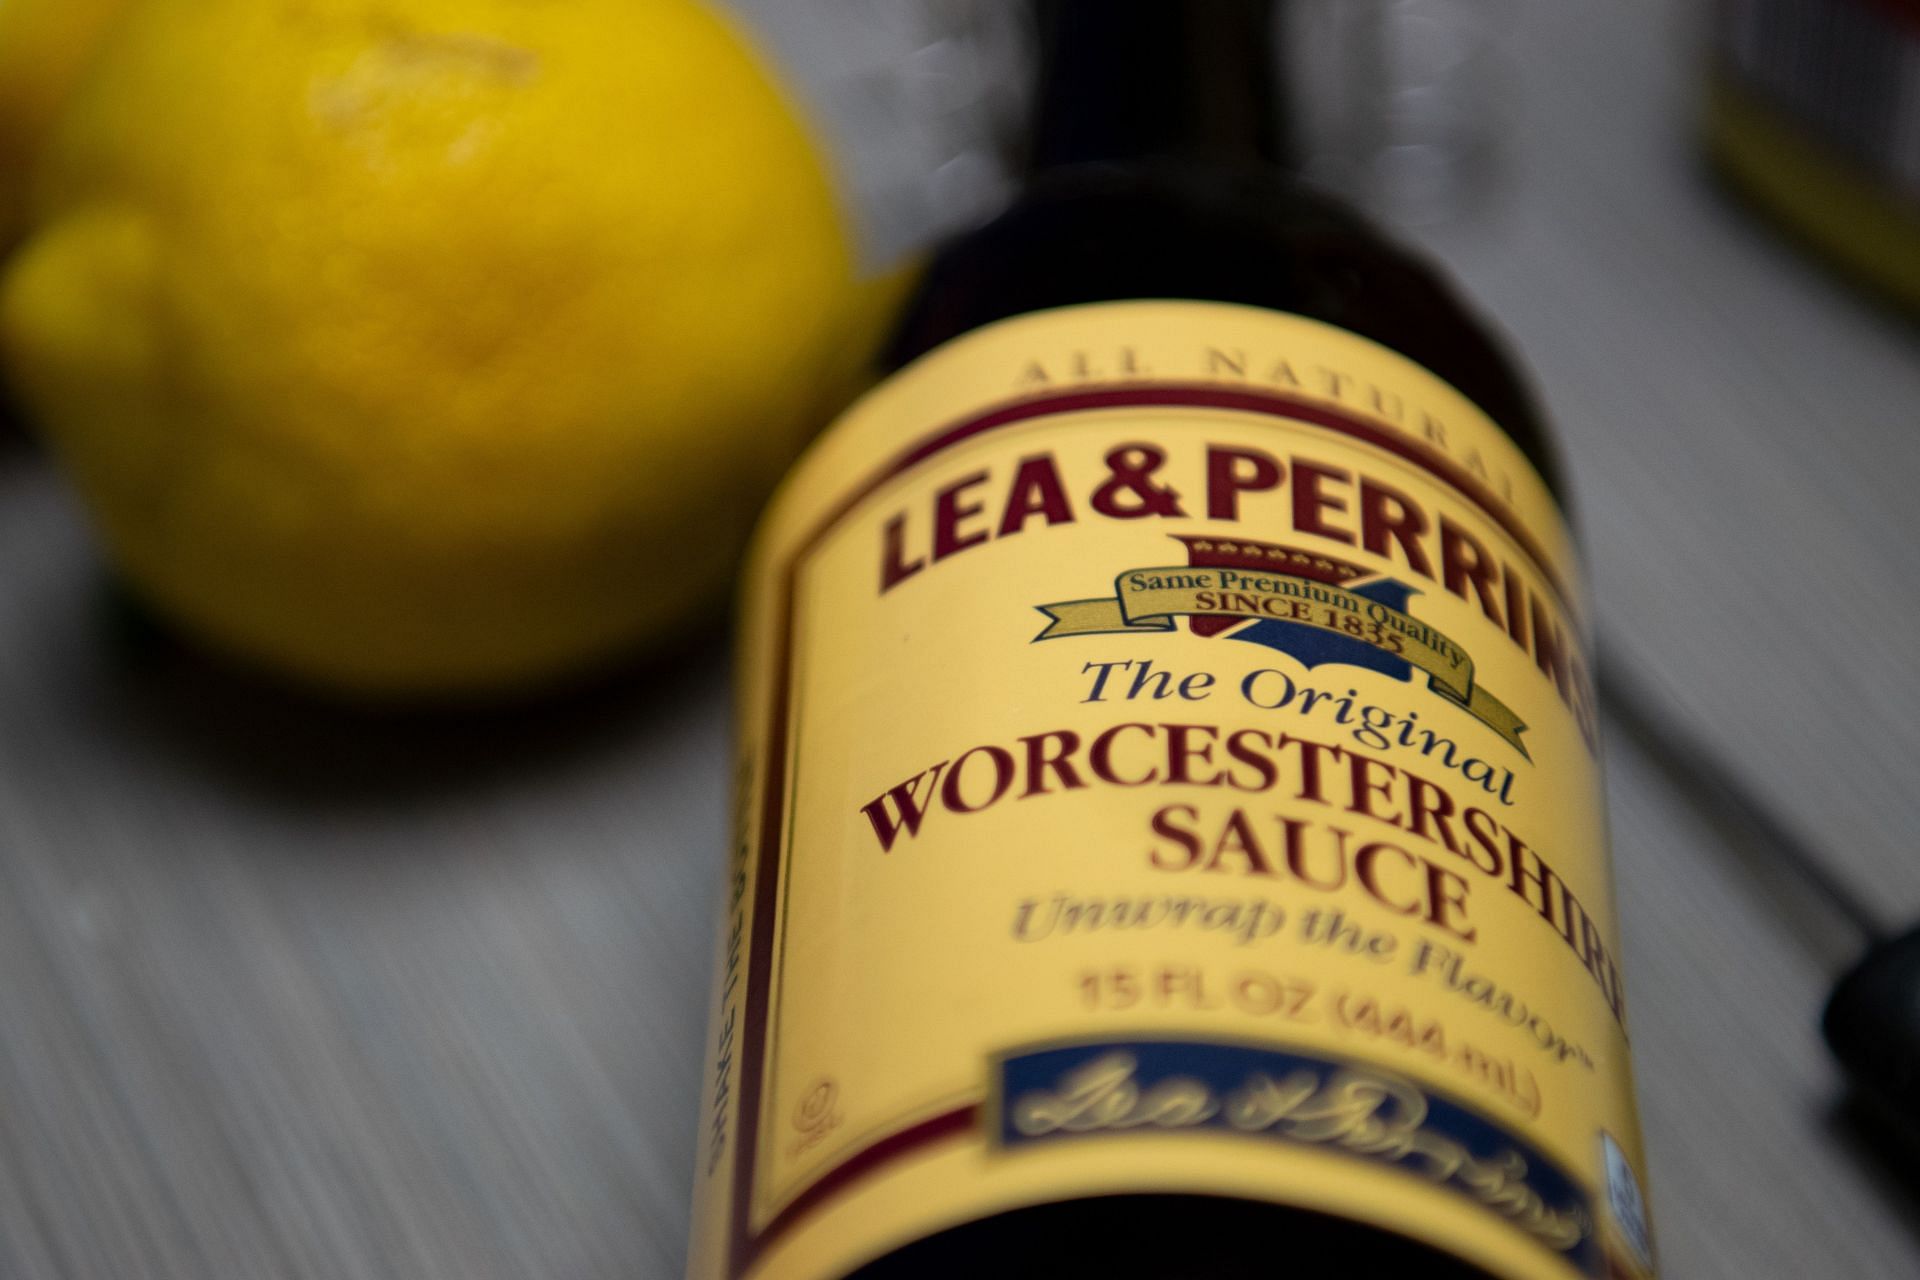 Worcestershire sauce is quite salty and savory. (Image via Unsplash/ Kelsey Todd)